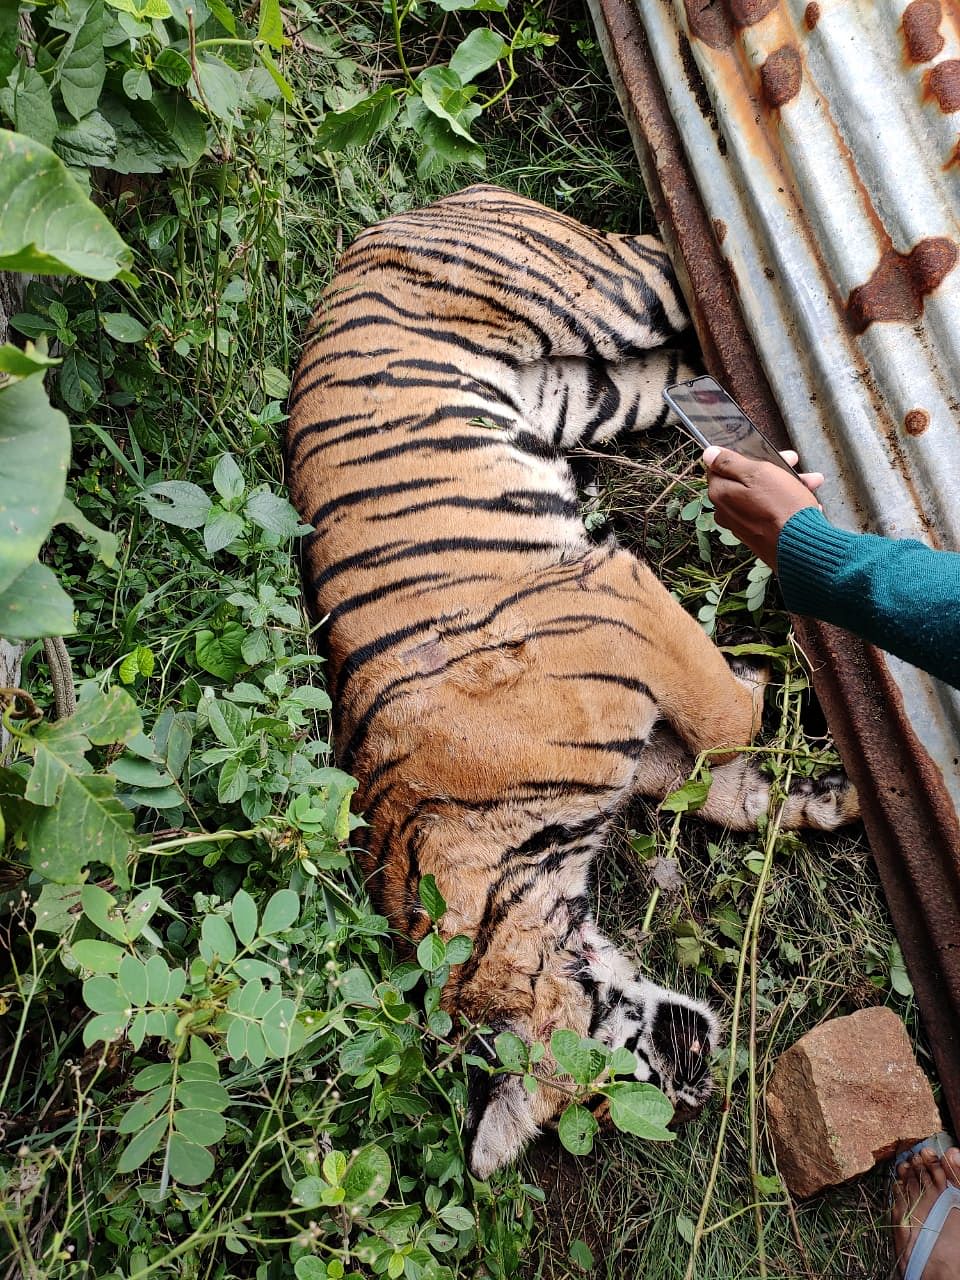 Carcass of a tiger found near Maguvinahalli in the taluk today morning. It is said that the tiger died due to the injuries but the cause of death is yet to be ascertained. Forest department officials have visited the spot (DH Photo)